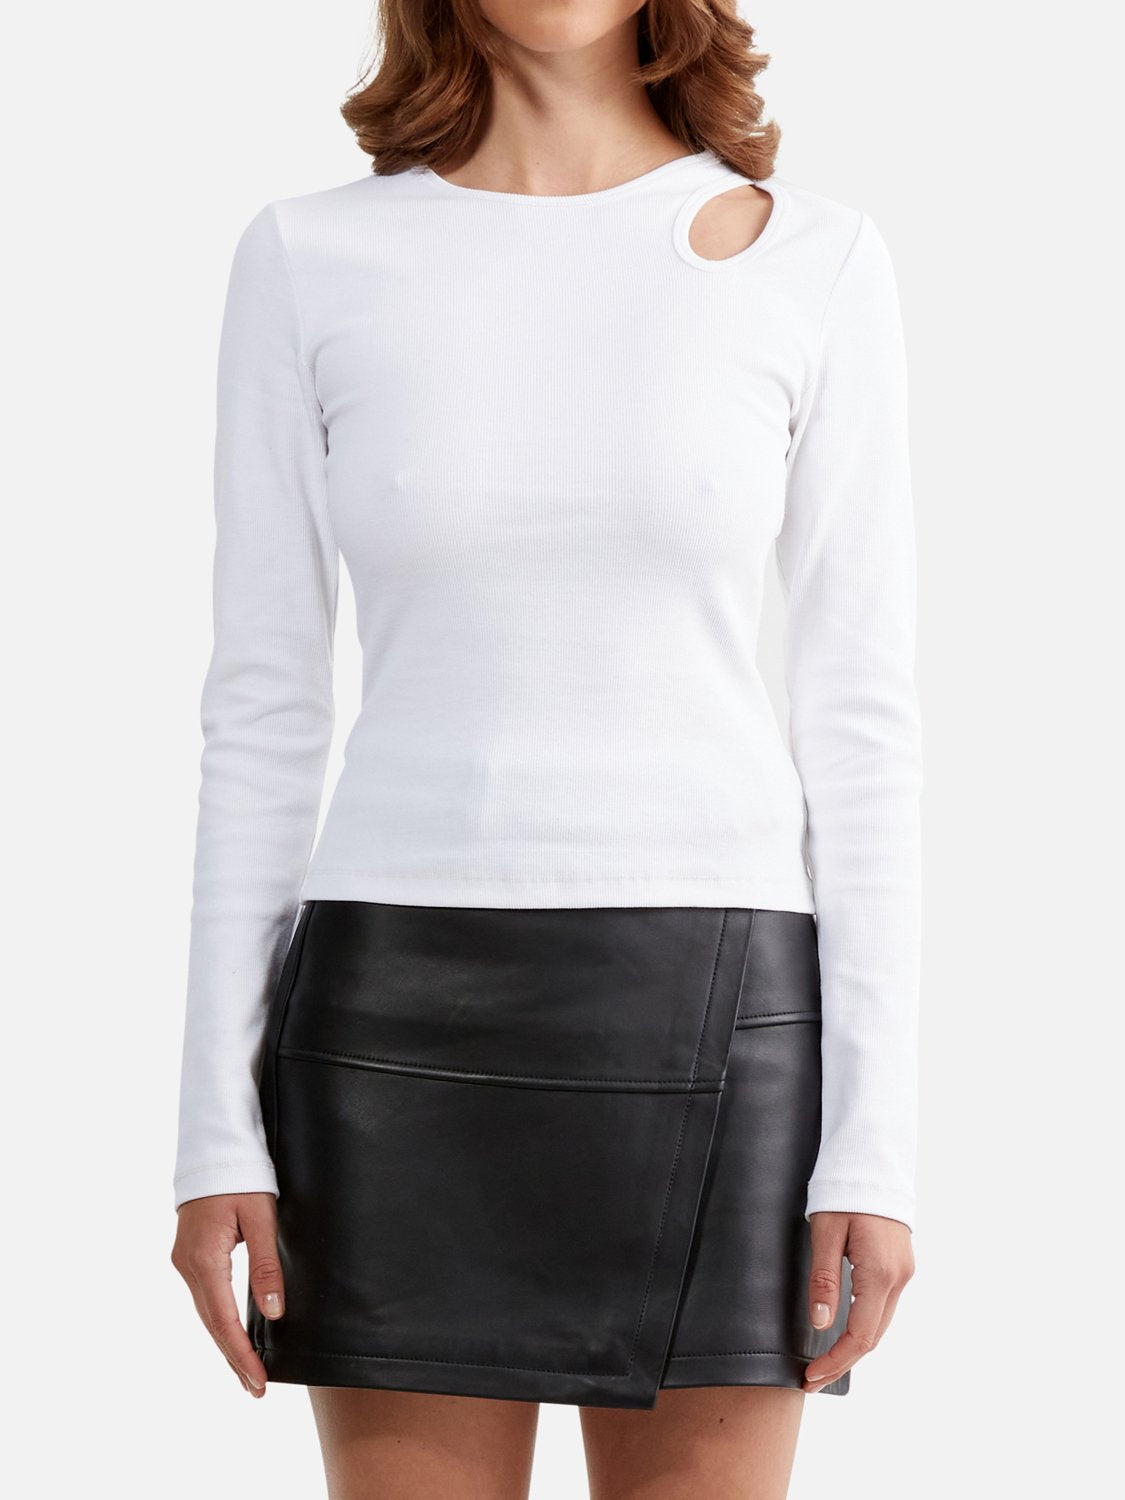 NORA CUT OUT LONG SLEEVE TOP - WHITE